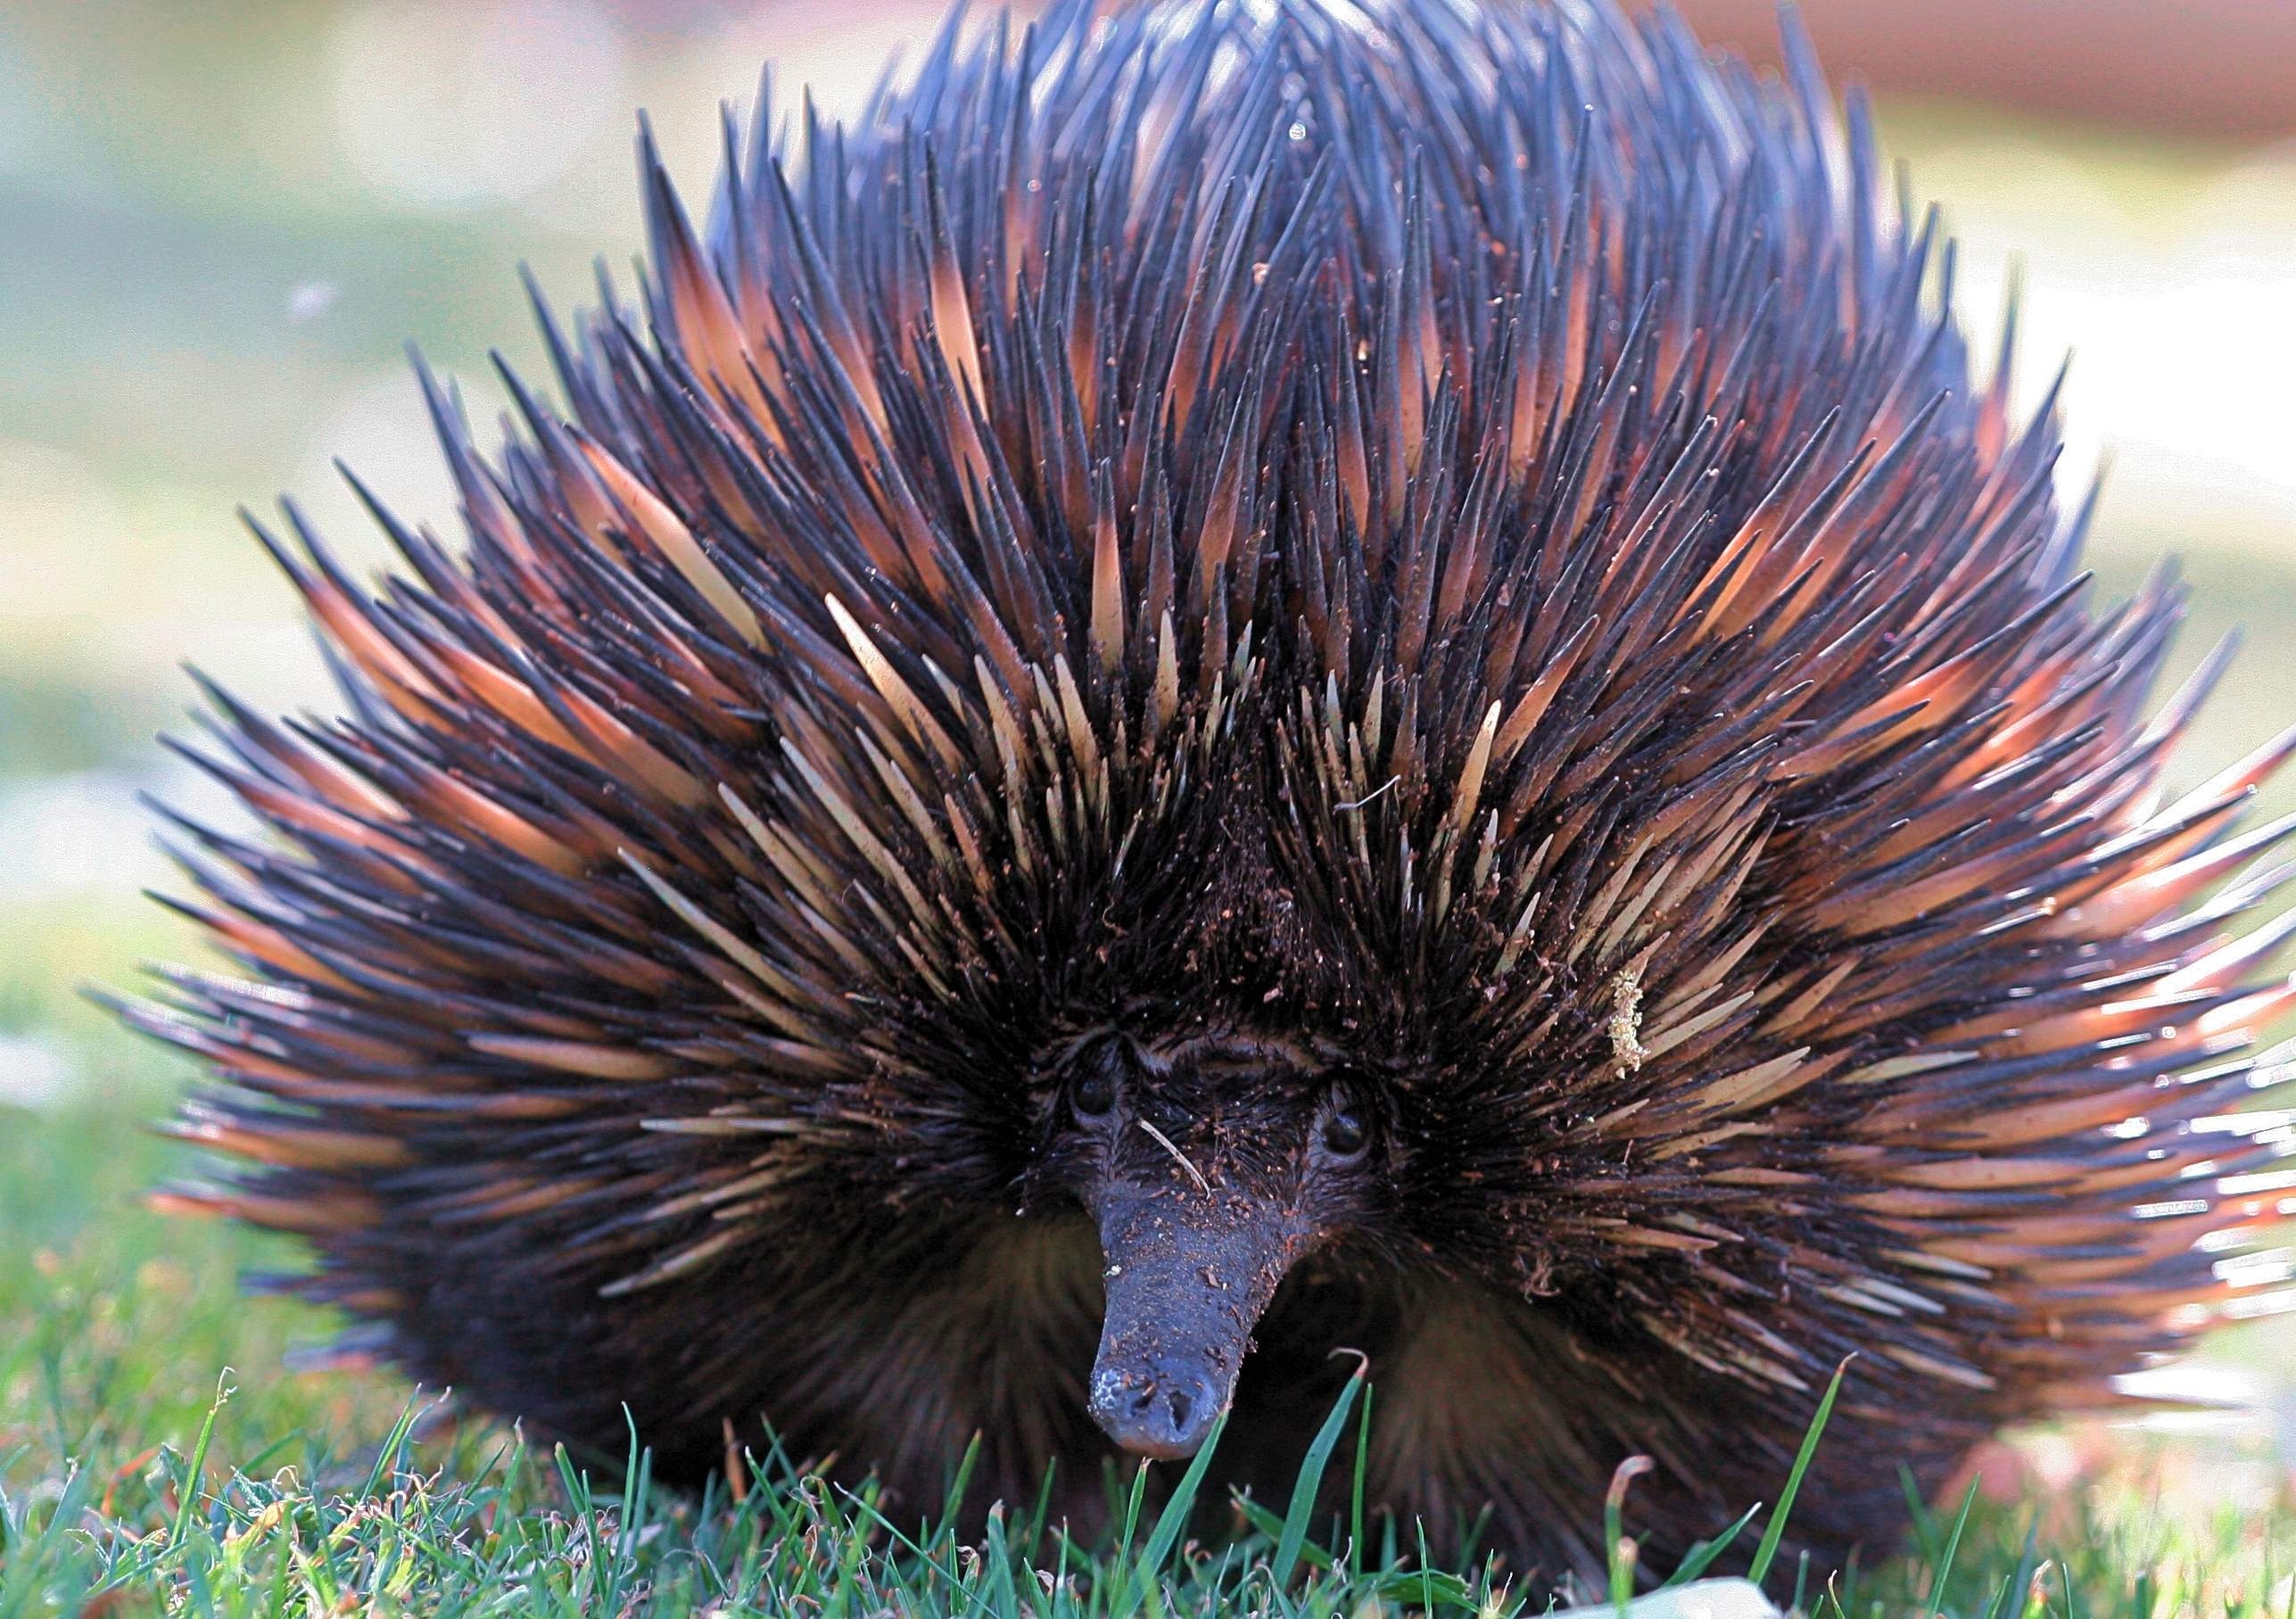 Enigmatic echidna, Puzzling monotreme, Intriguing features, Fonwall picture, 2580x1820 HD Desktop